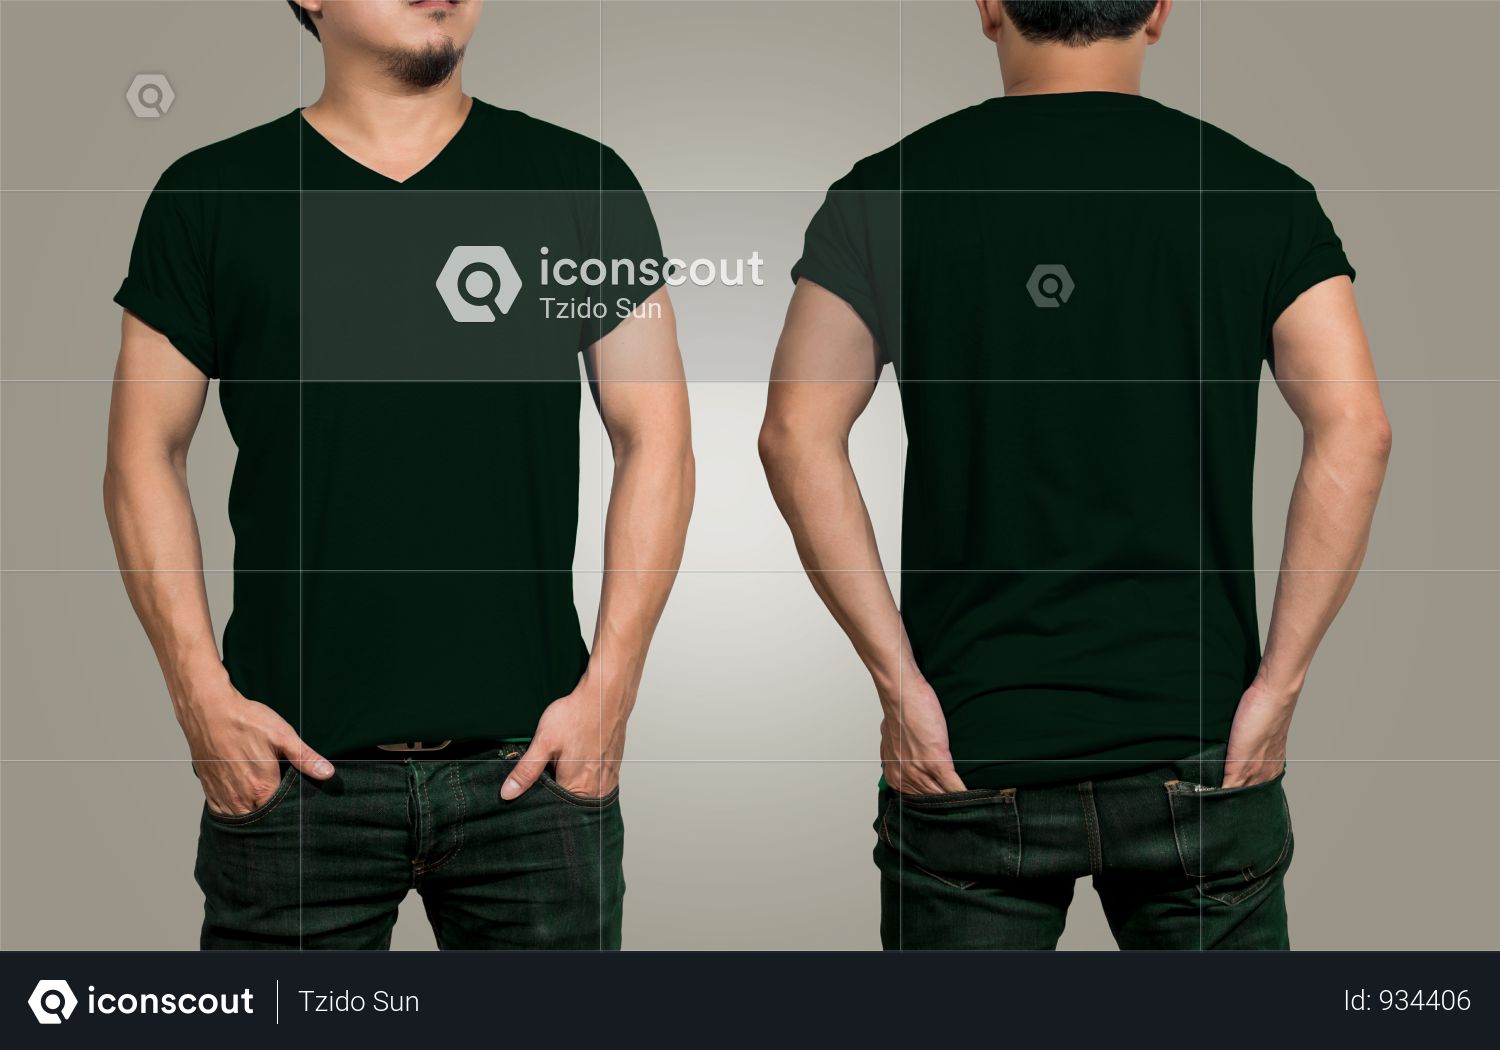 Download Premium T-shirt Mockup With Front And Back View Photo download in PNG & JPG format